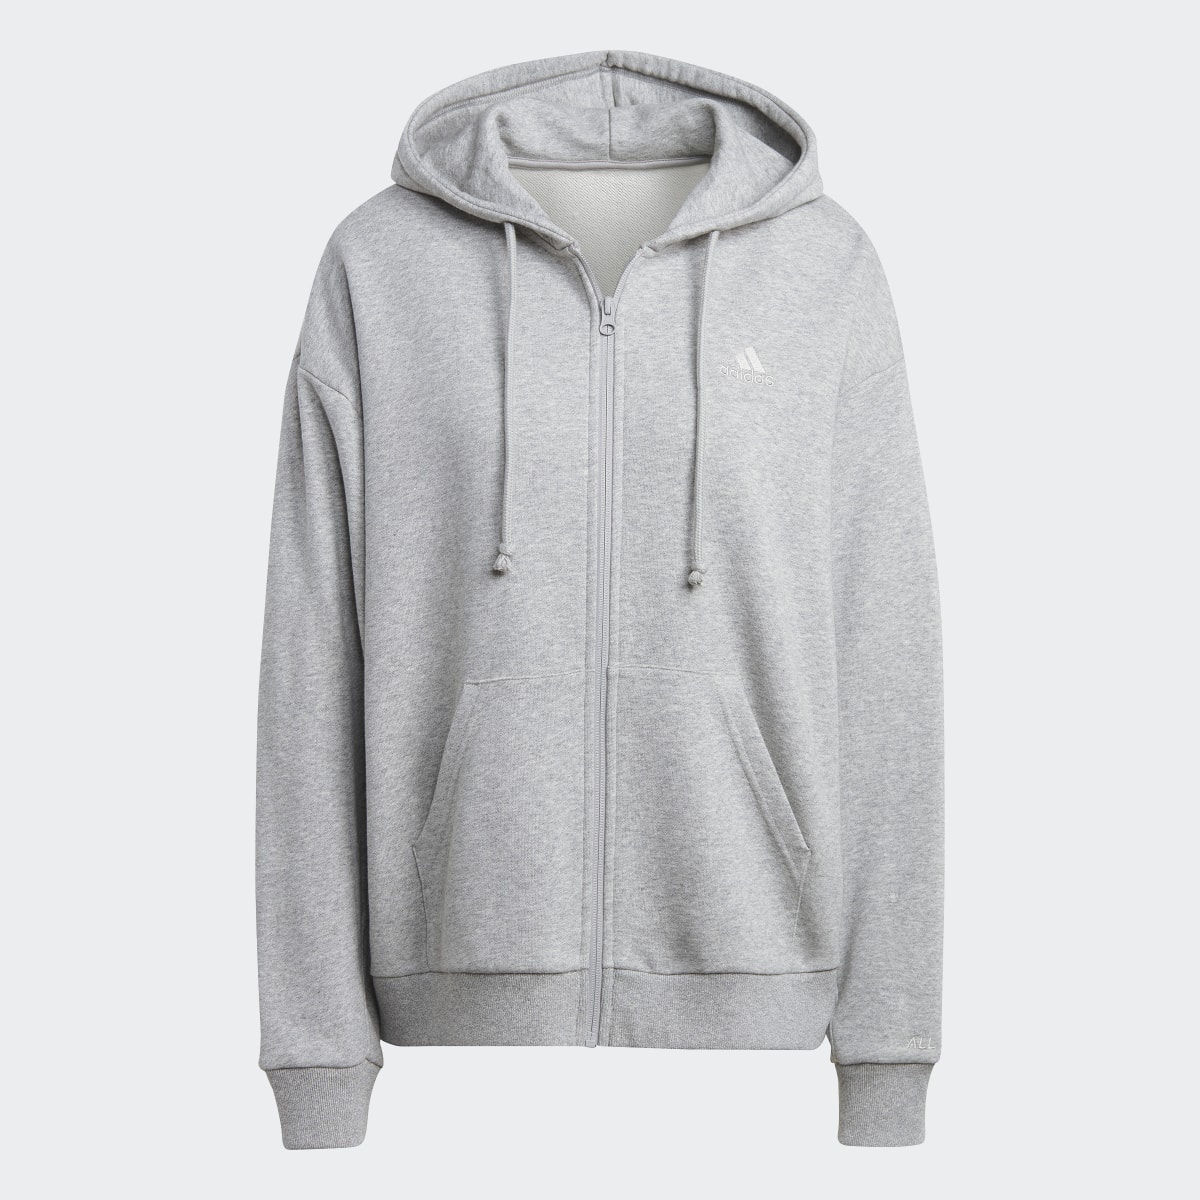 Adidas All SZN French Terry Oversized Full-Zip Hoodie. 5